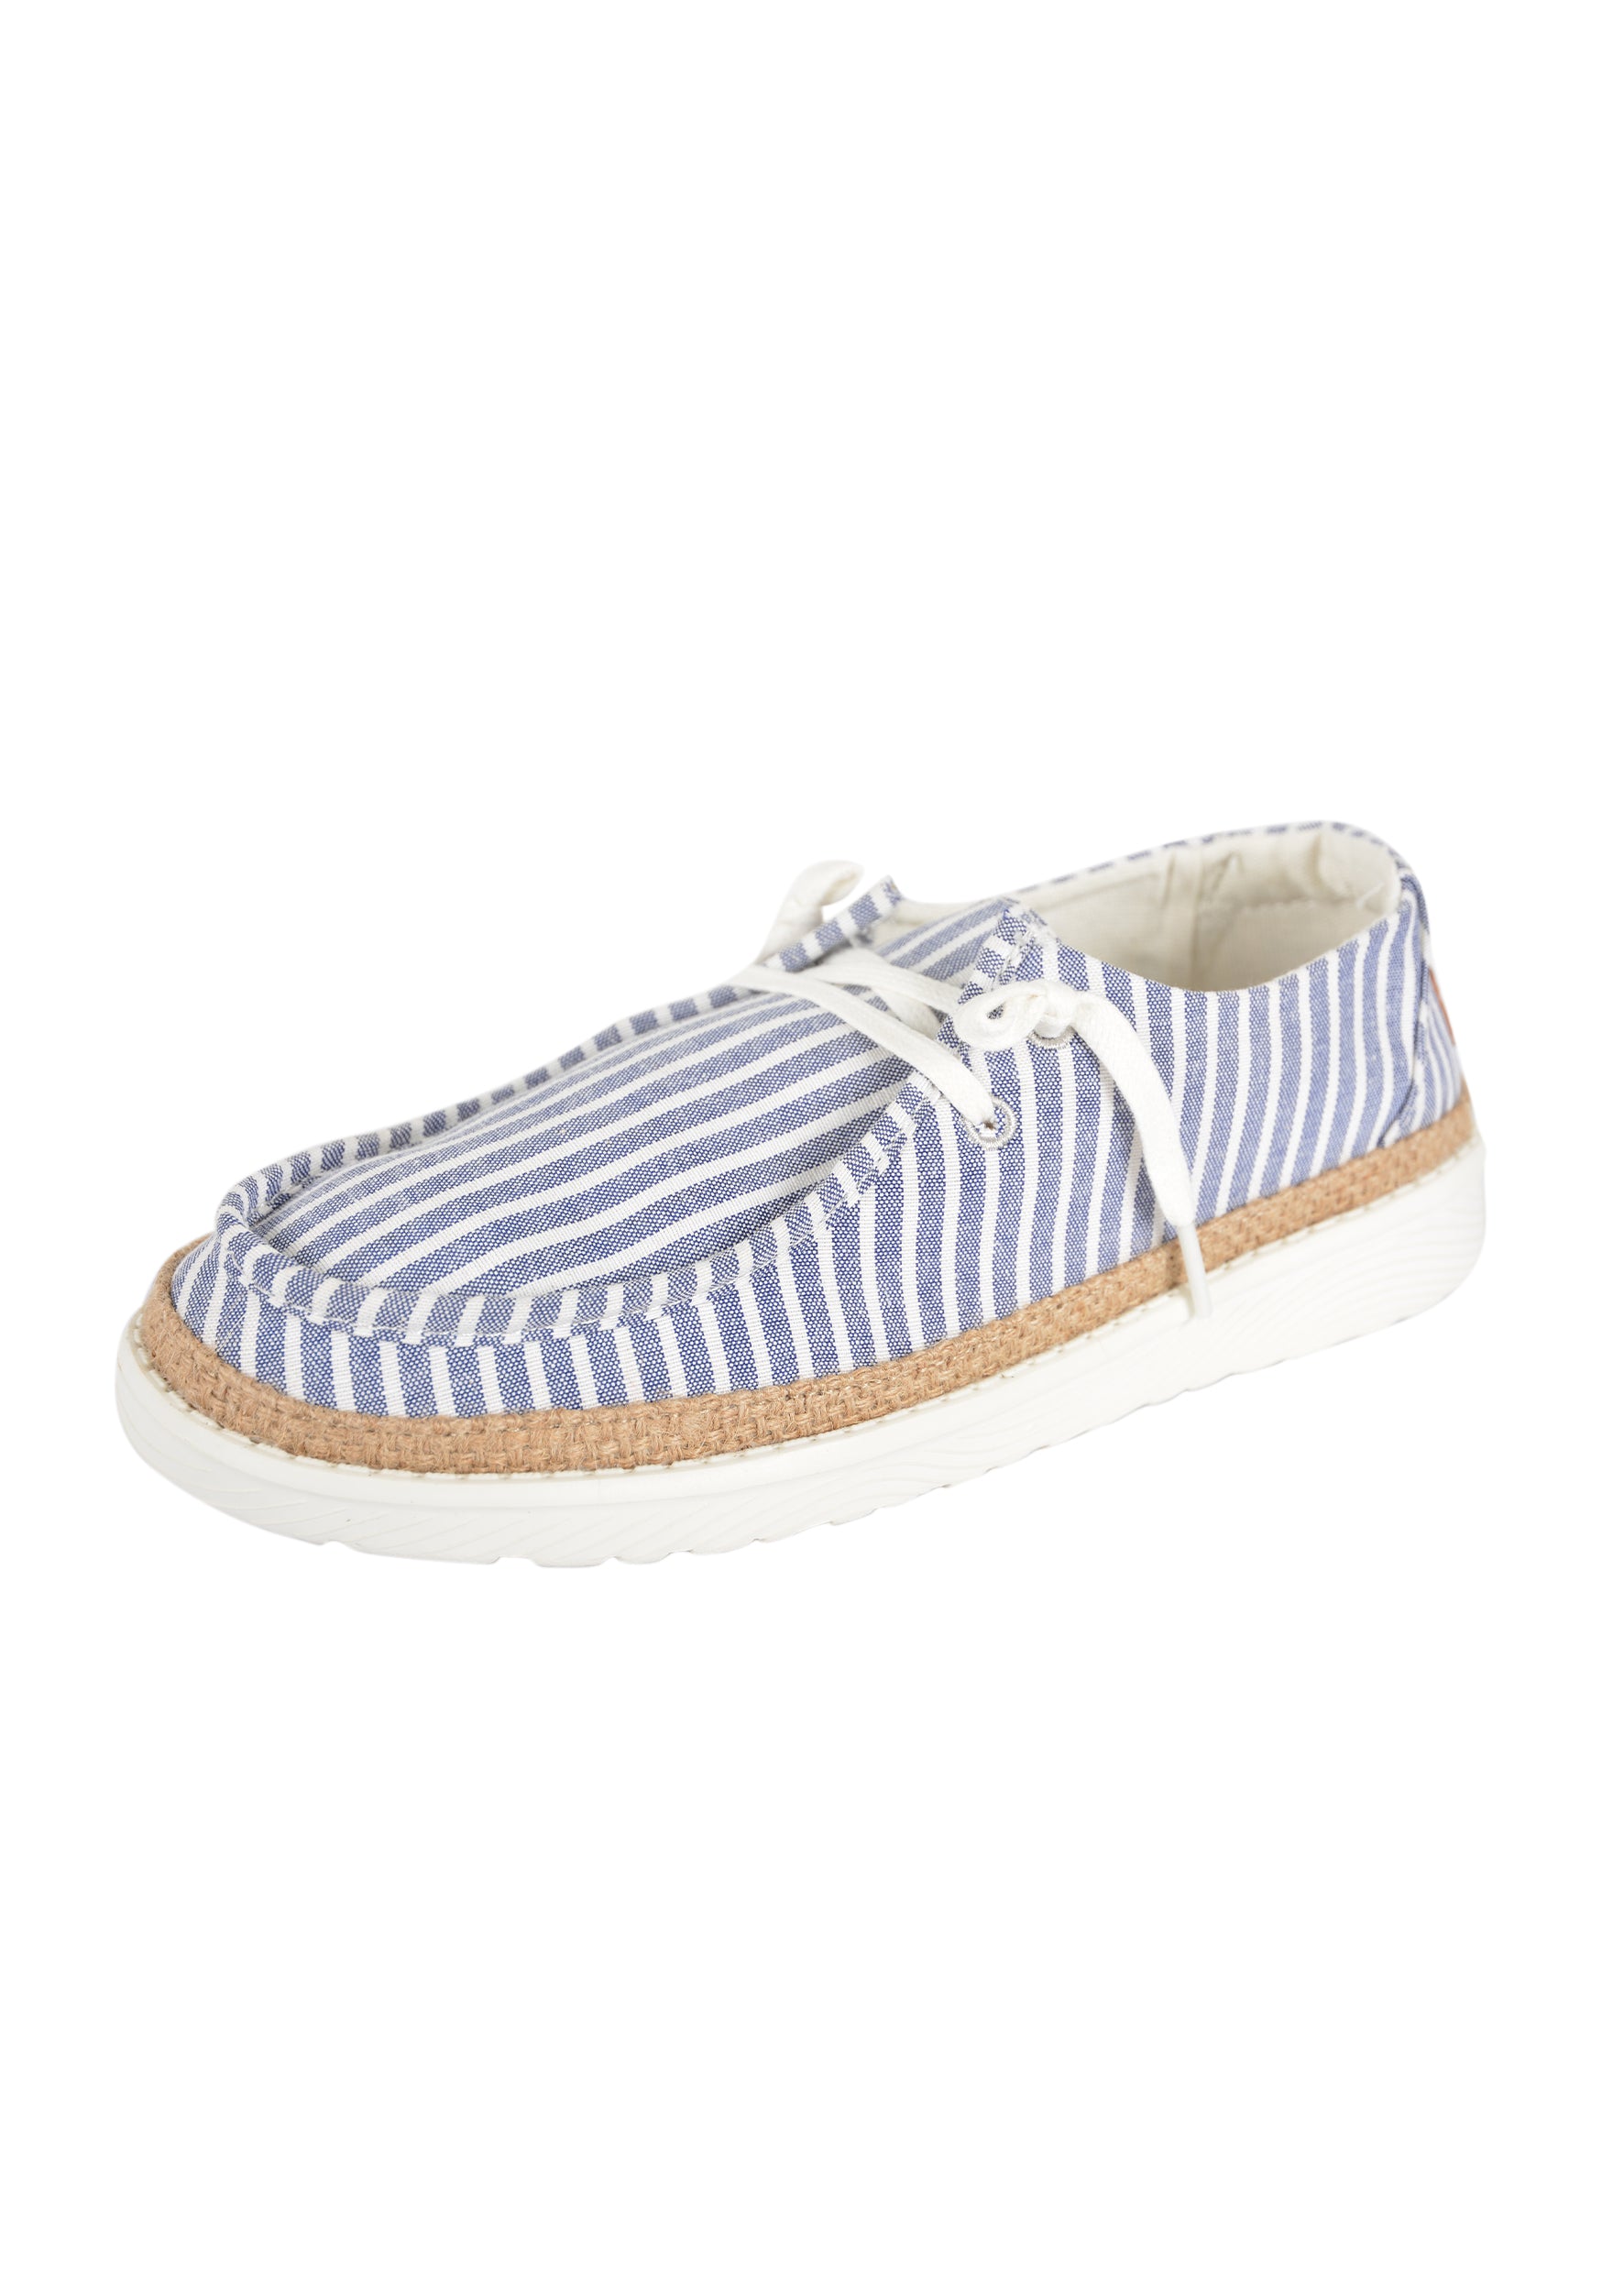 Thomas Cook Wmns Vacation Lite Casual Lace Up Shoe